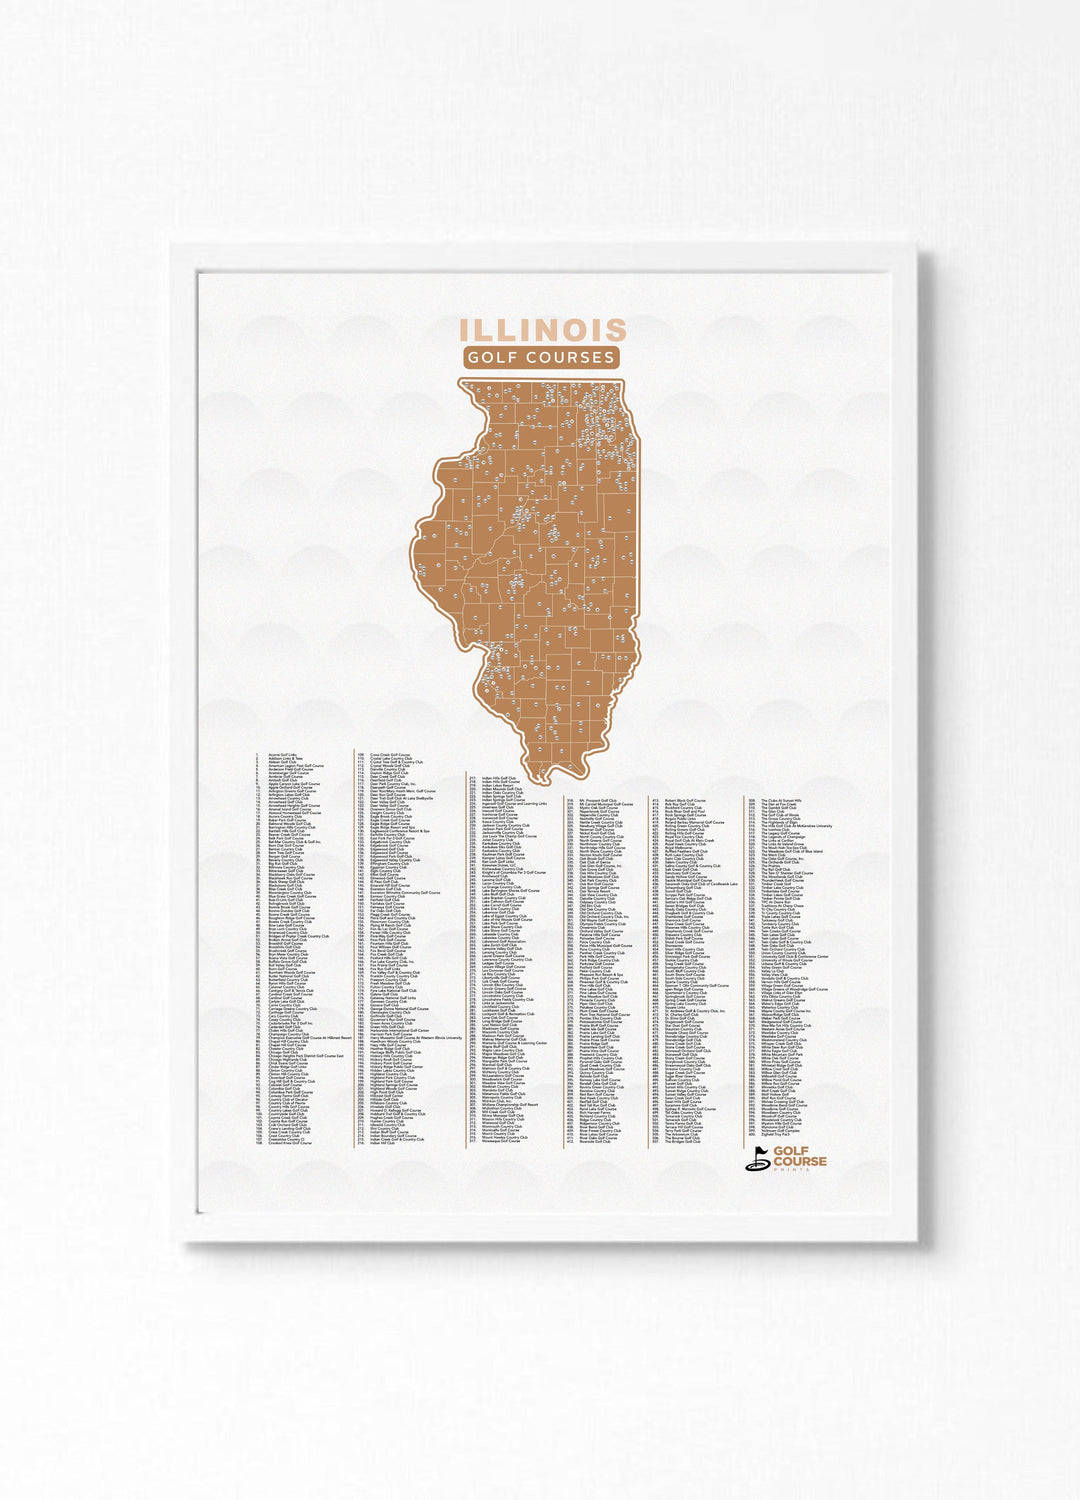 Map of Illinois Golf Courses - Golf Course Prints